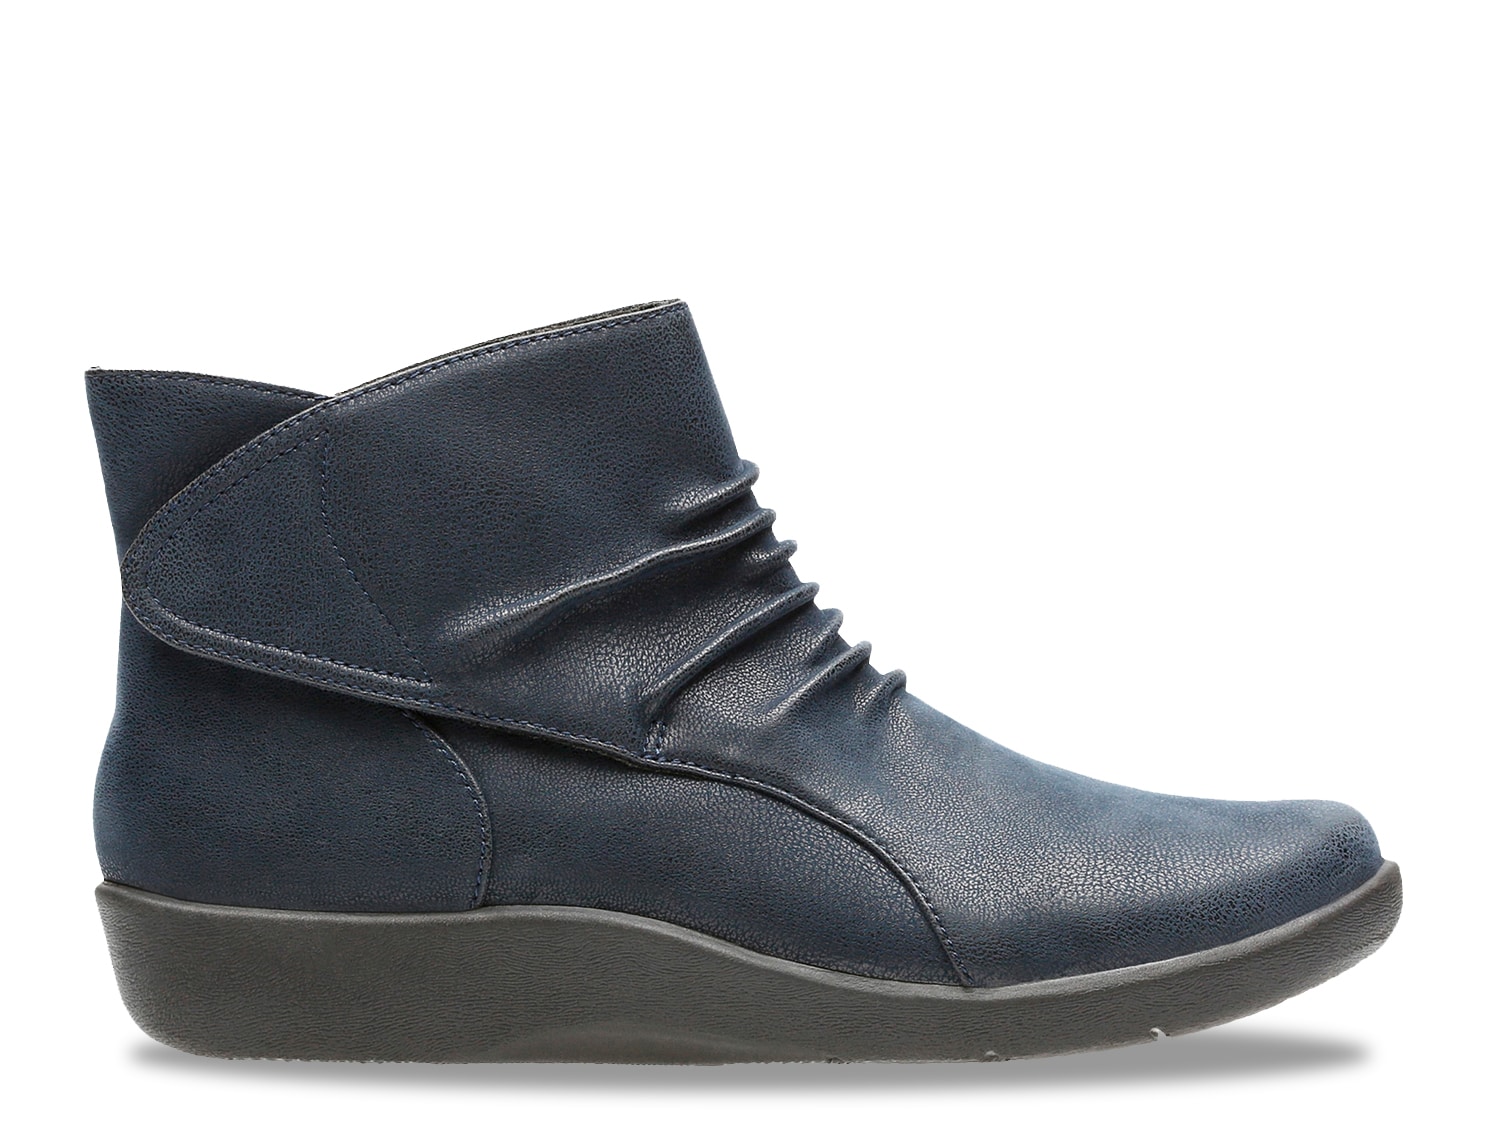 clarks cloudsteppers sillian sway